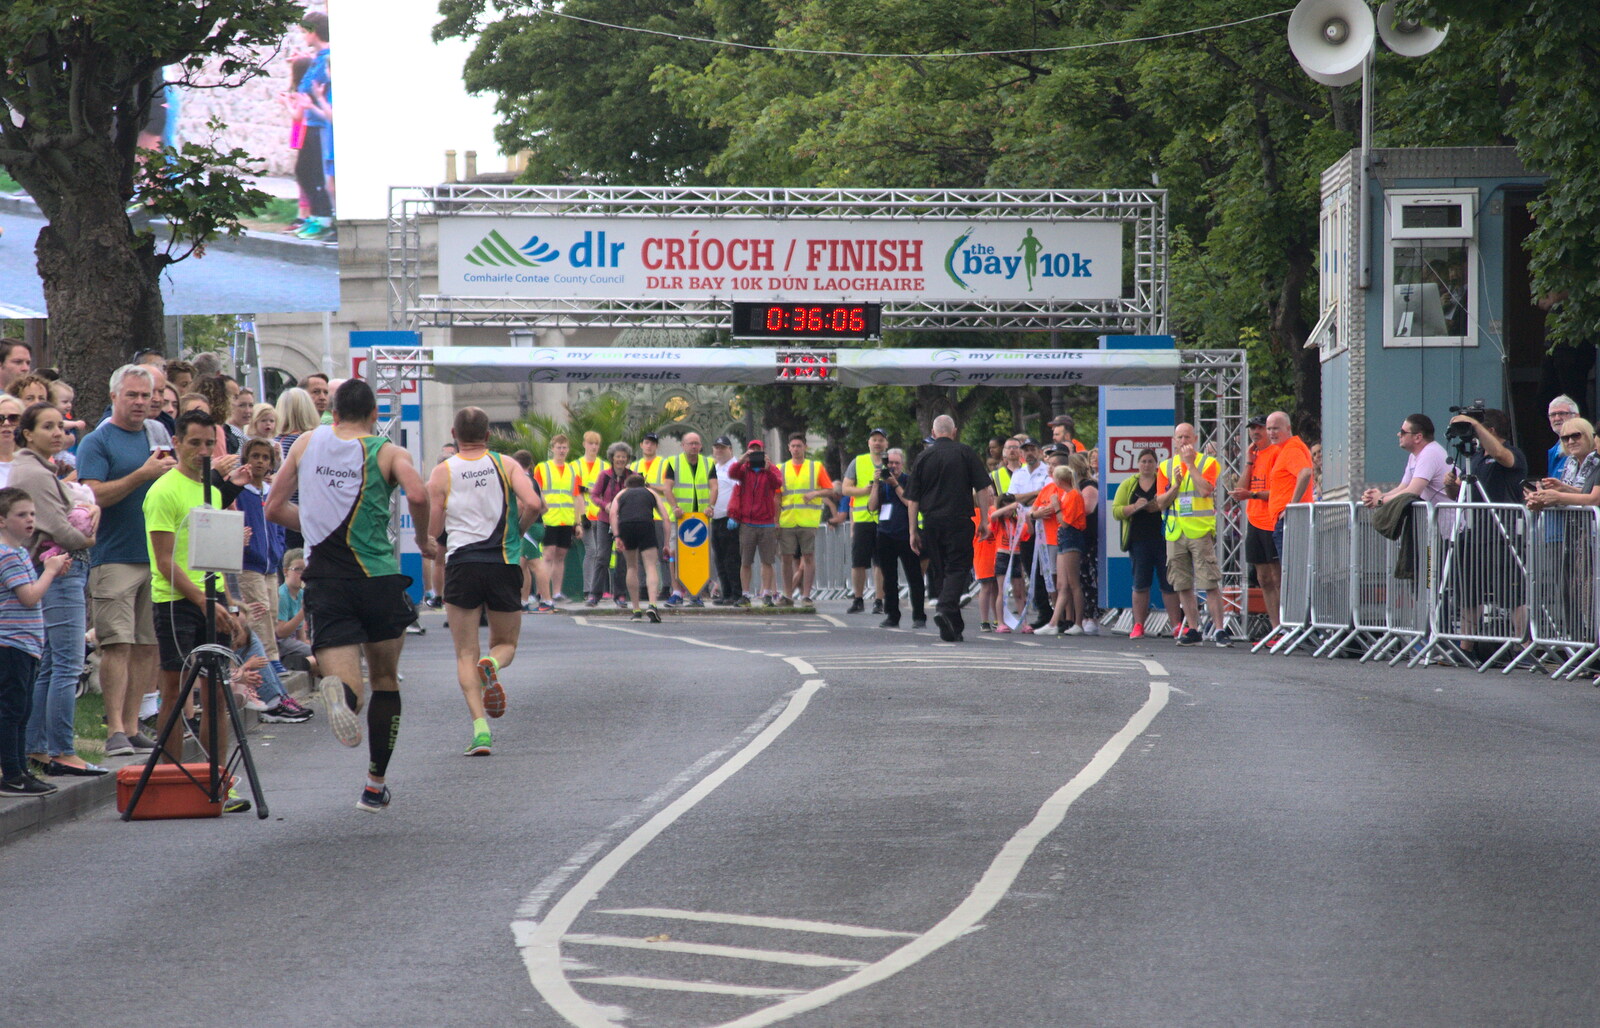 A sprint to the finish from The Dún Laoghaire 10k Run, County Dublin, Ireland - 6th August 2018